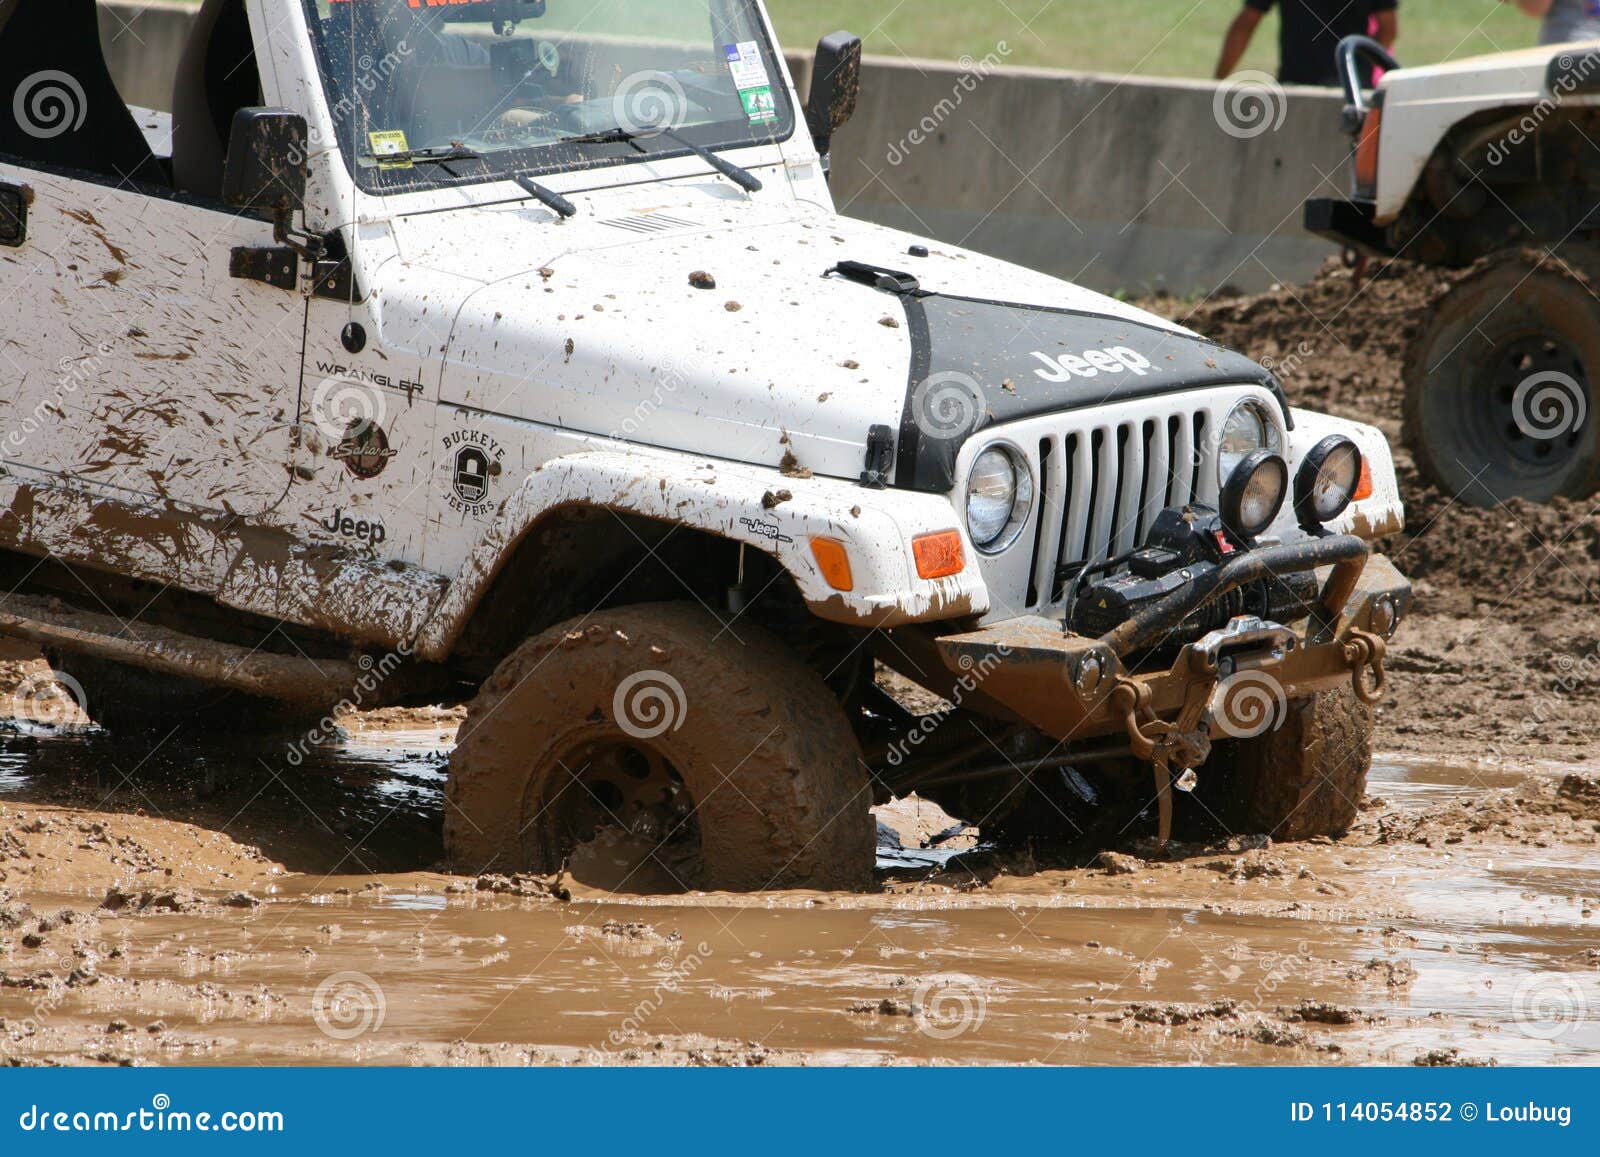  Jeep  Wrangler  in Mud  editorial photography Image of ohio 